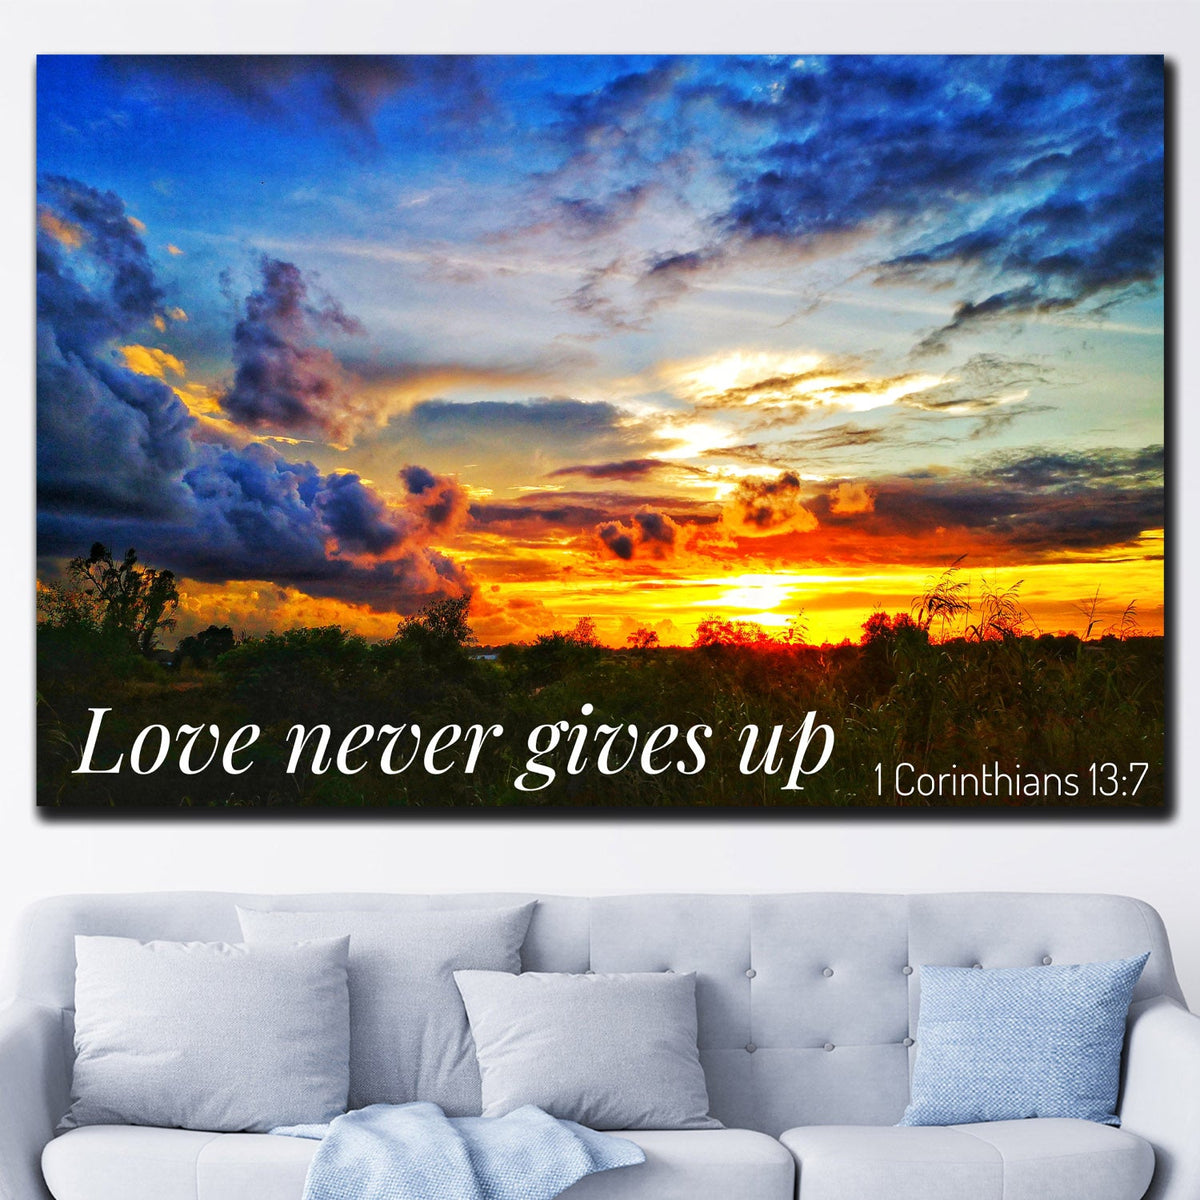 https://cdn.shopify.com/s/files/1/0387/9986/8044/products/LoveNeverGivesUpCanvasArtprintStretched-2.jpg